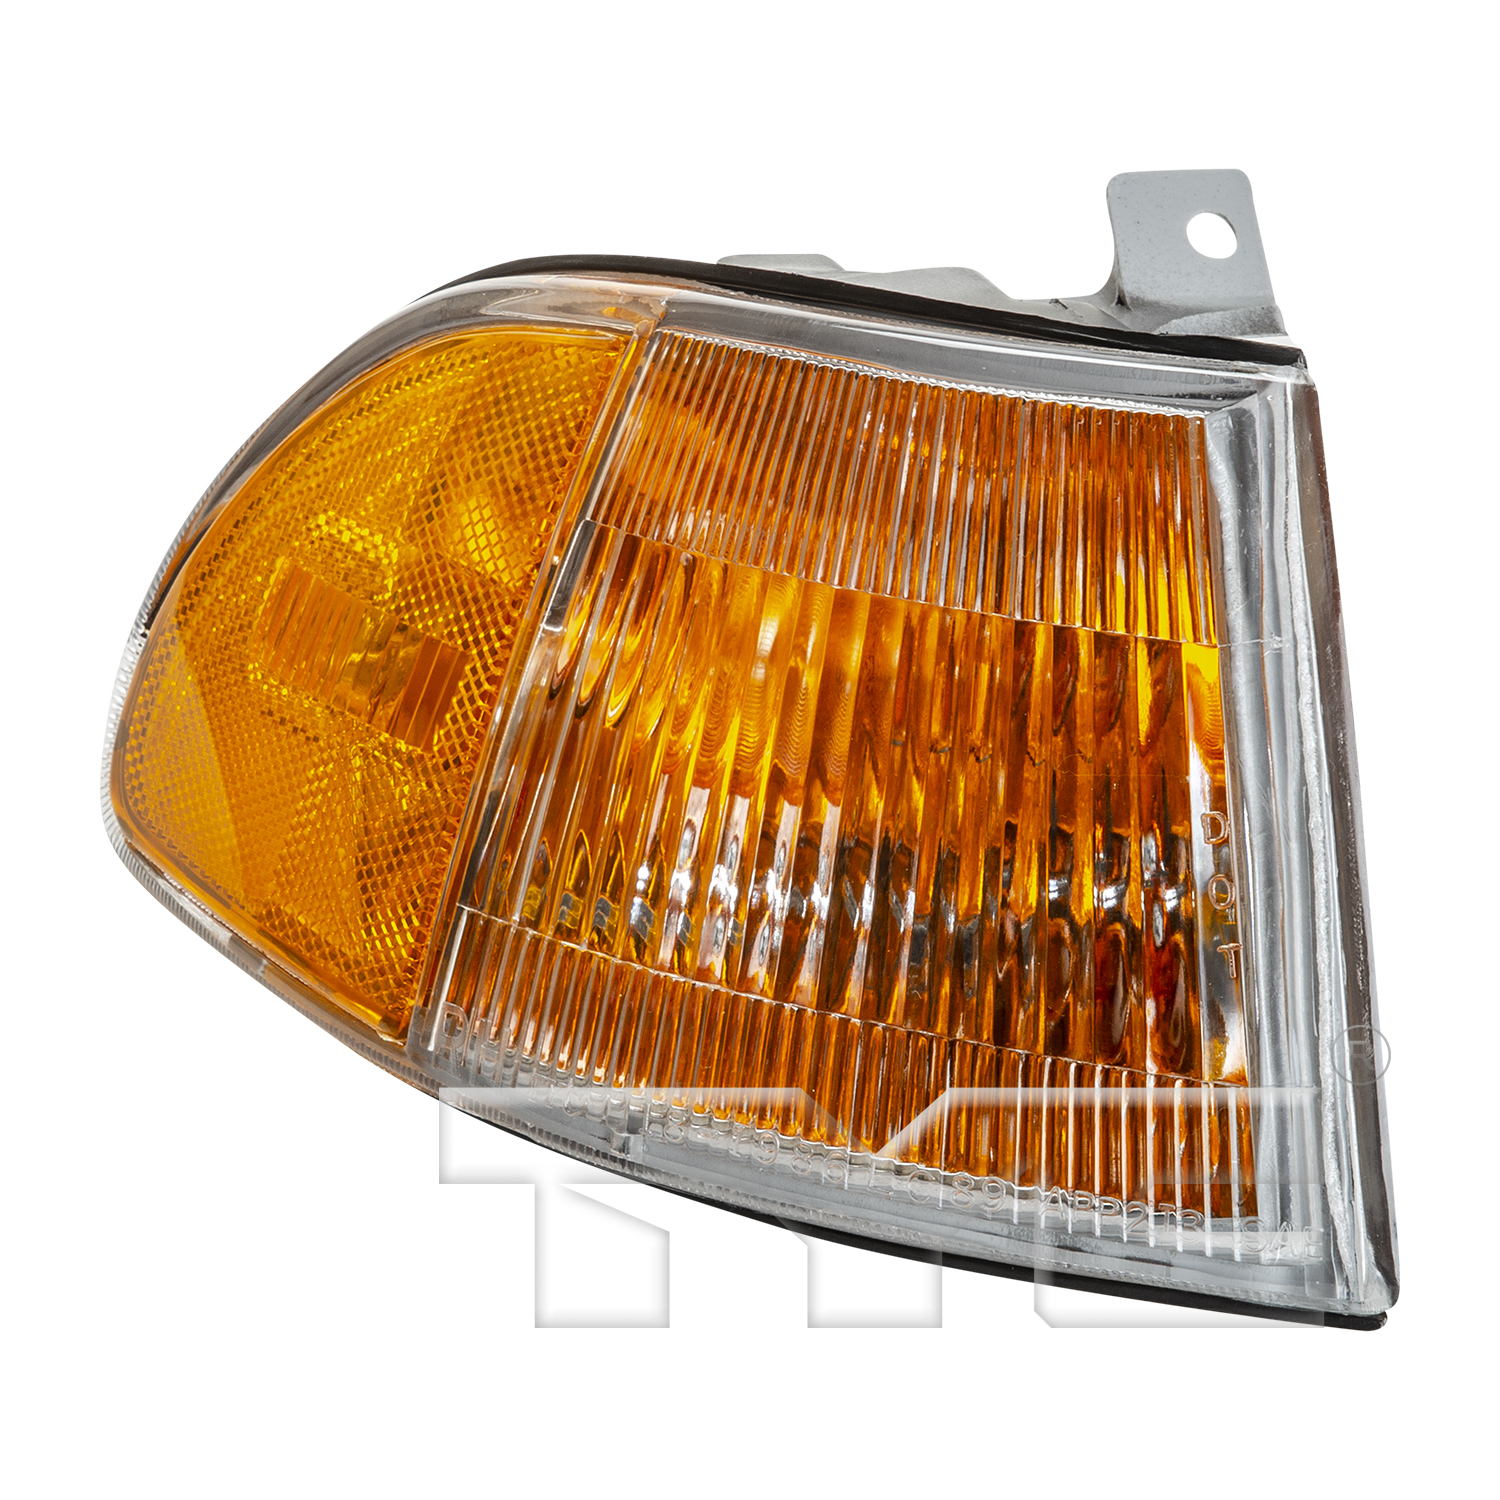 Aftermarket LAMPS for HONDA - CIVIC, CIVIC,92-95,RT Front marker lamp assy